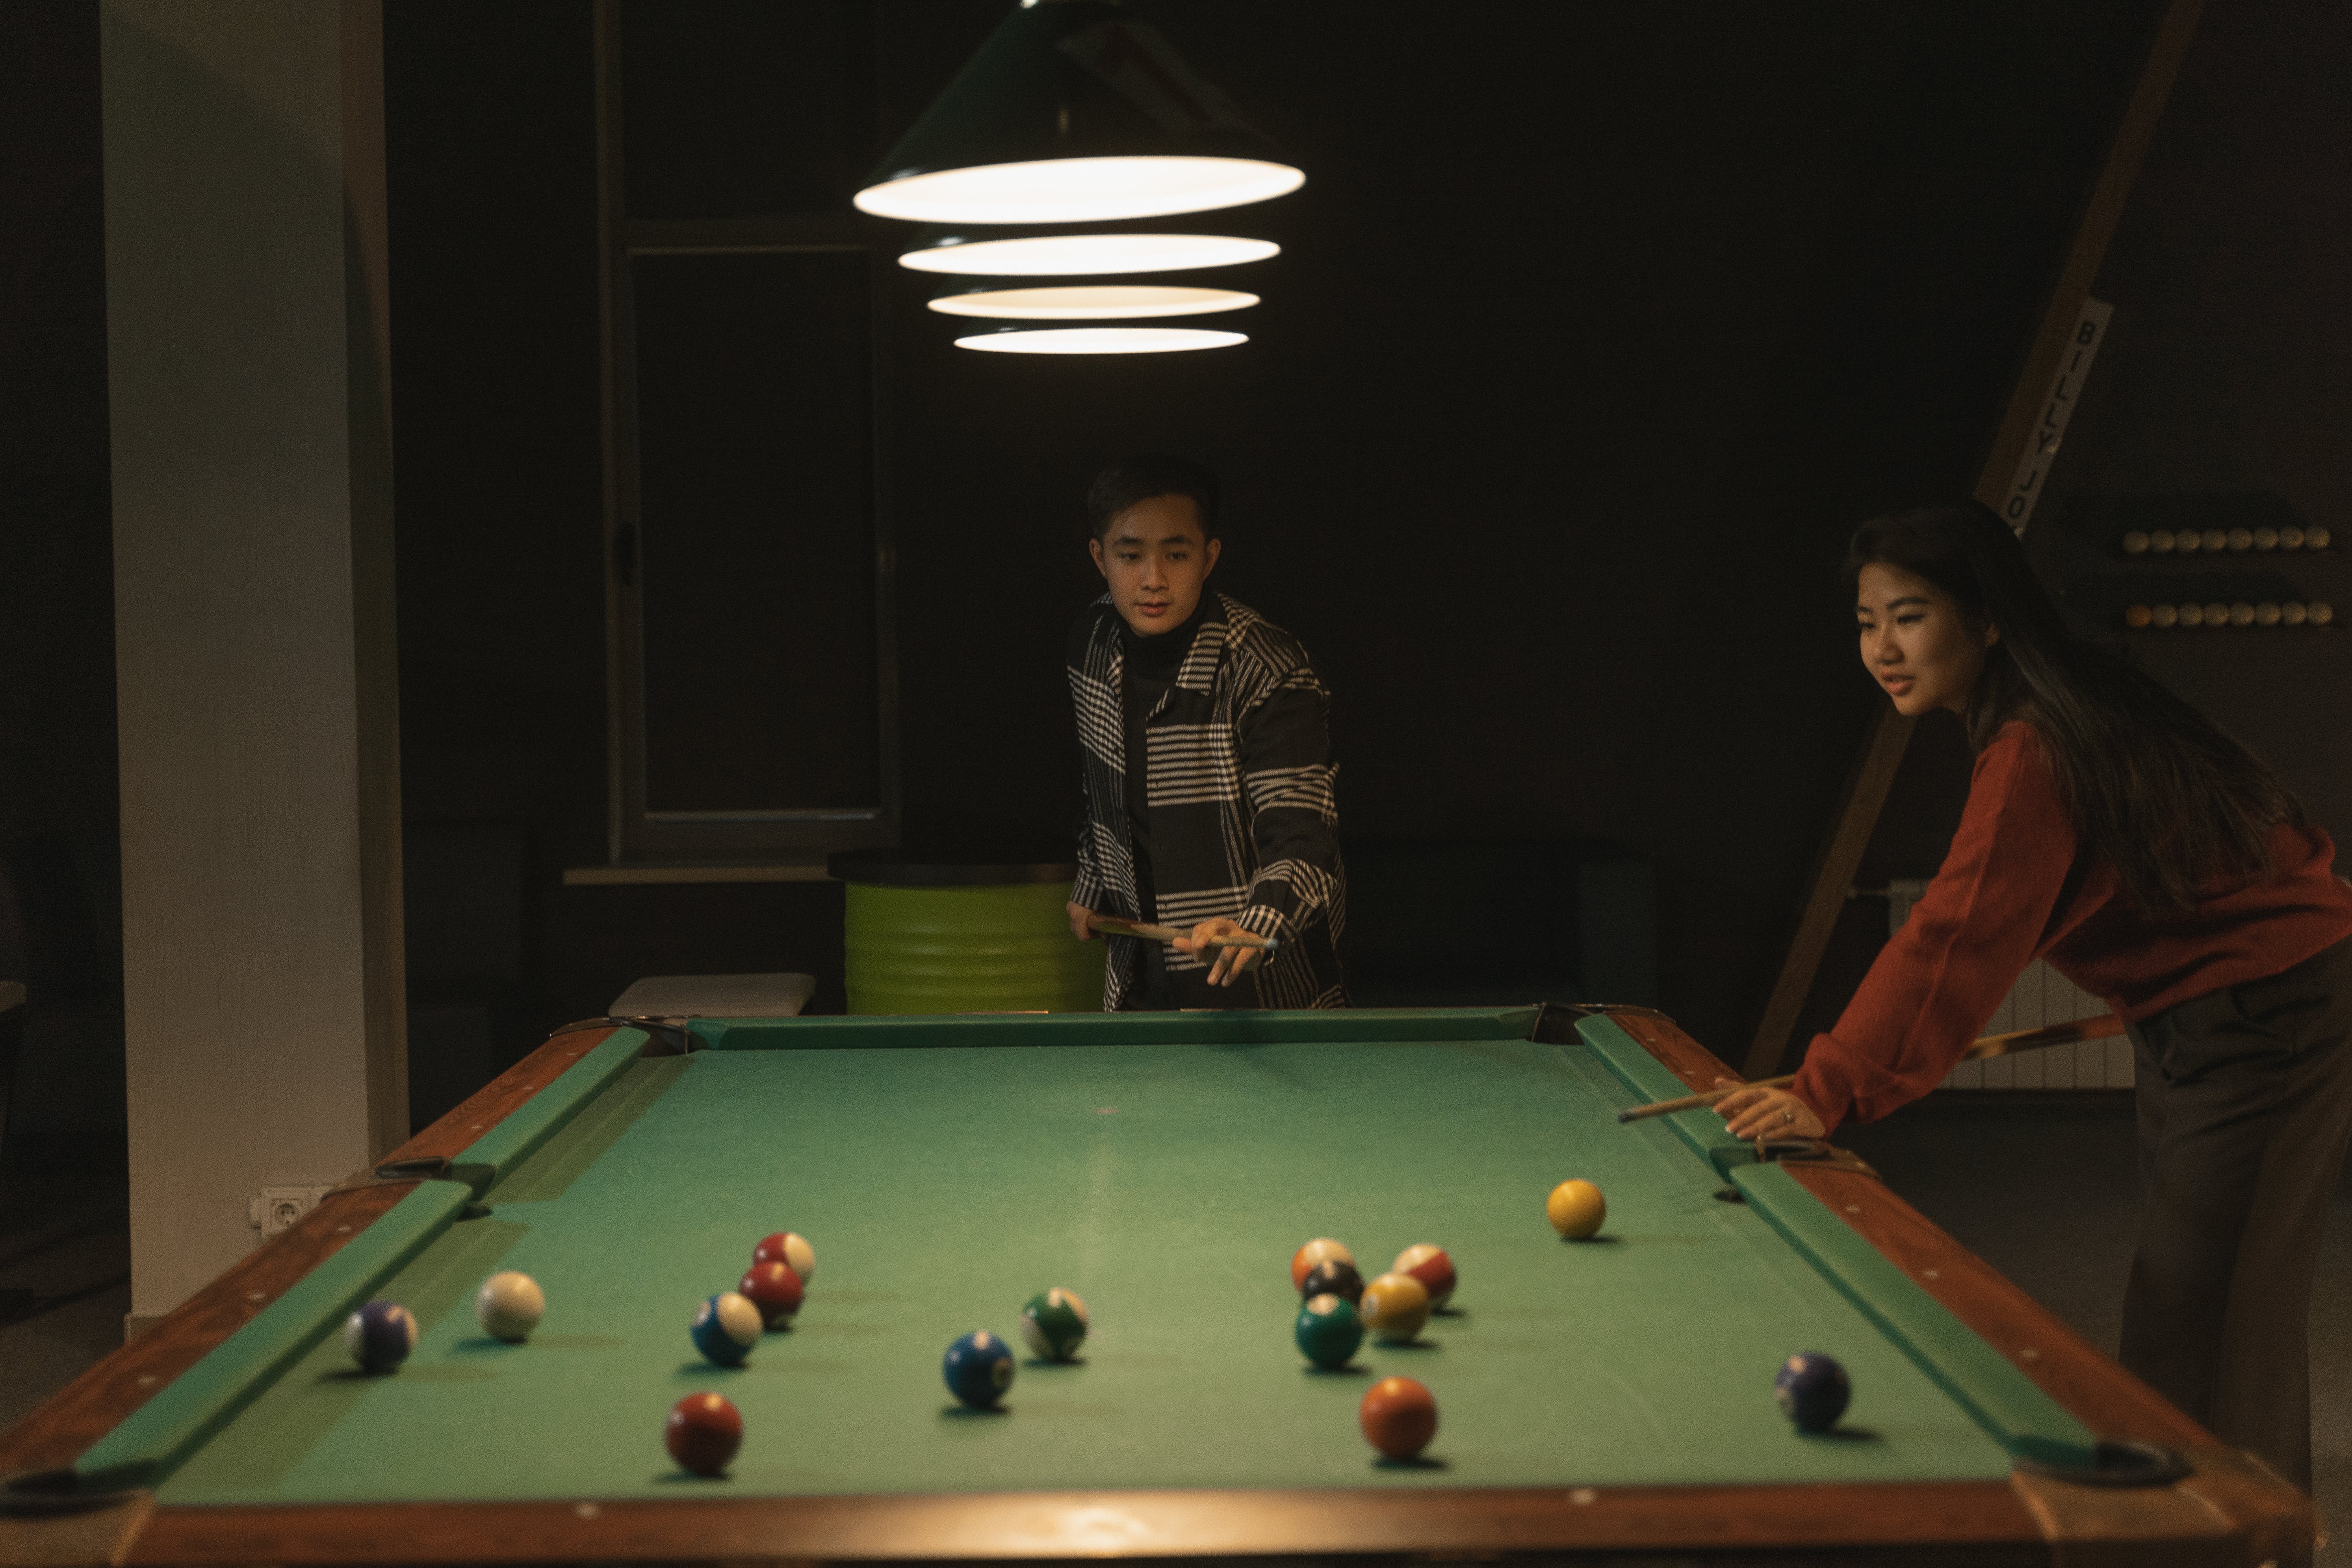 A man and a woman playing pool. | Source: Pexels